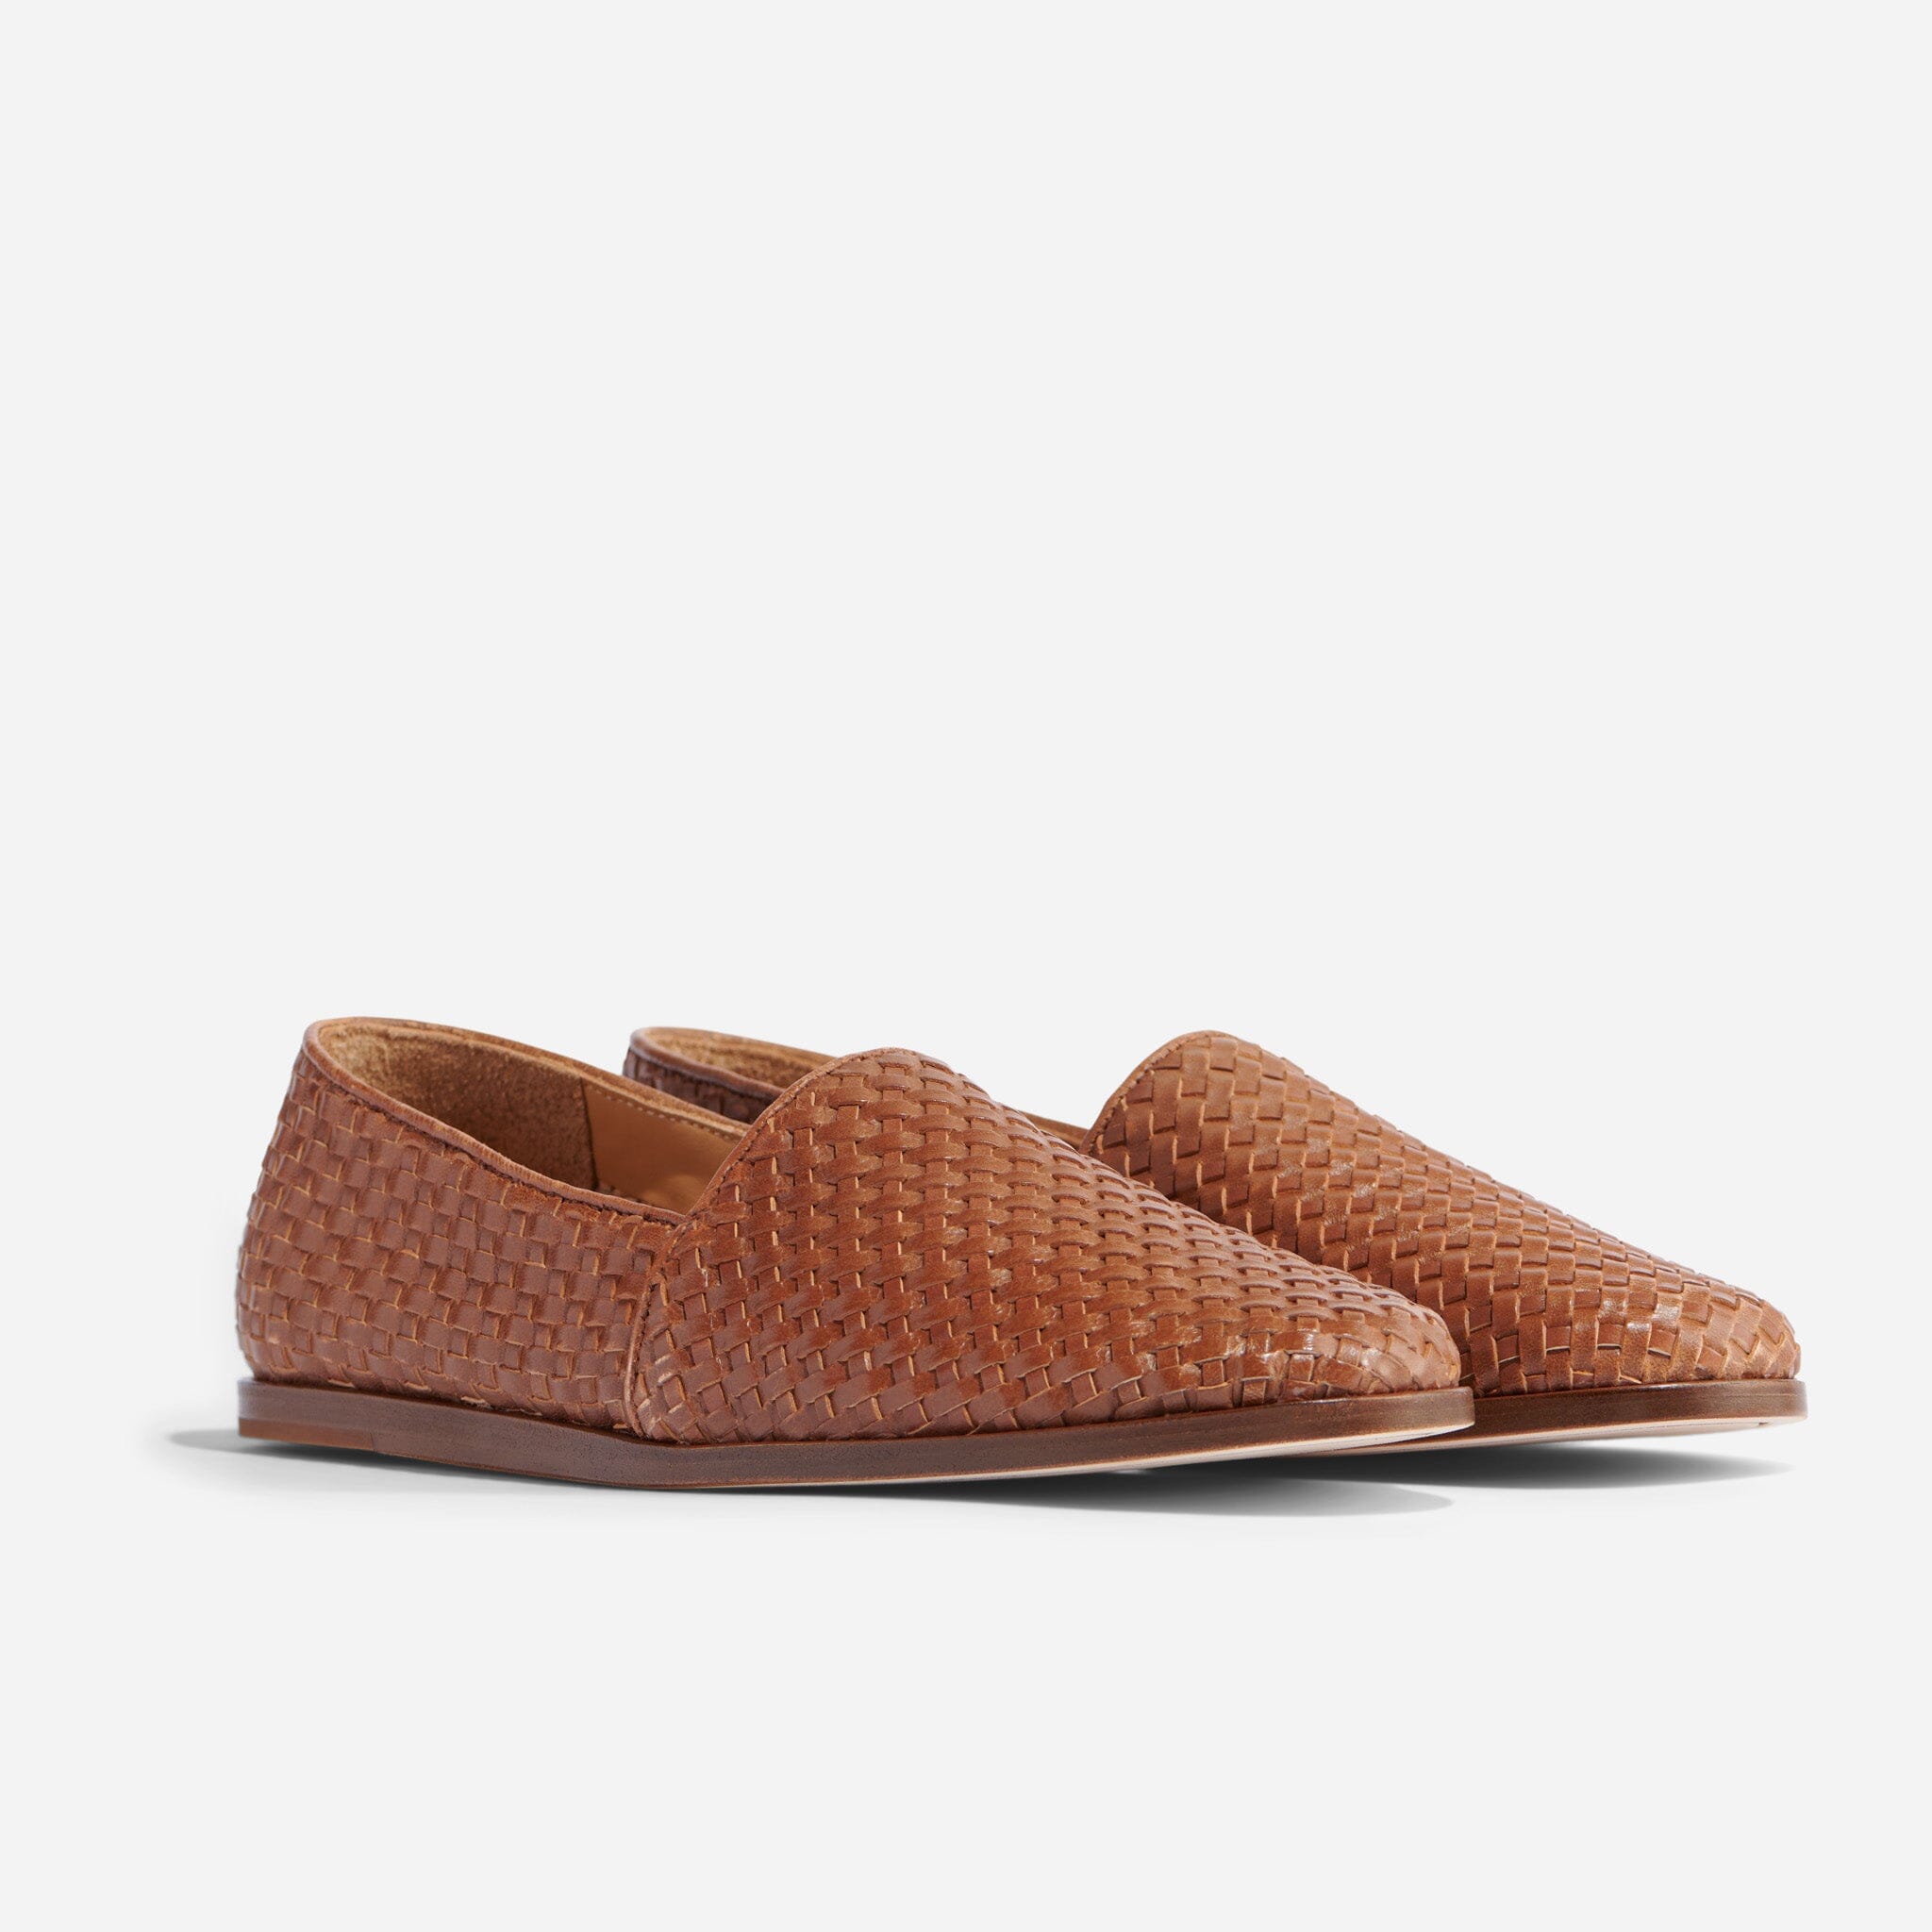 Later Tater's Men’s slip-on canvas shoes